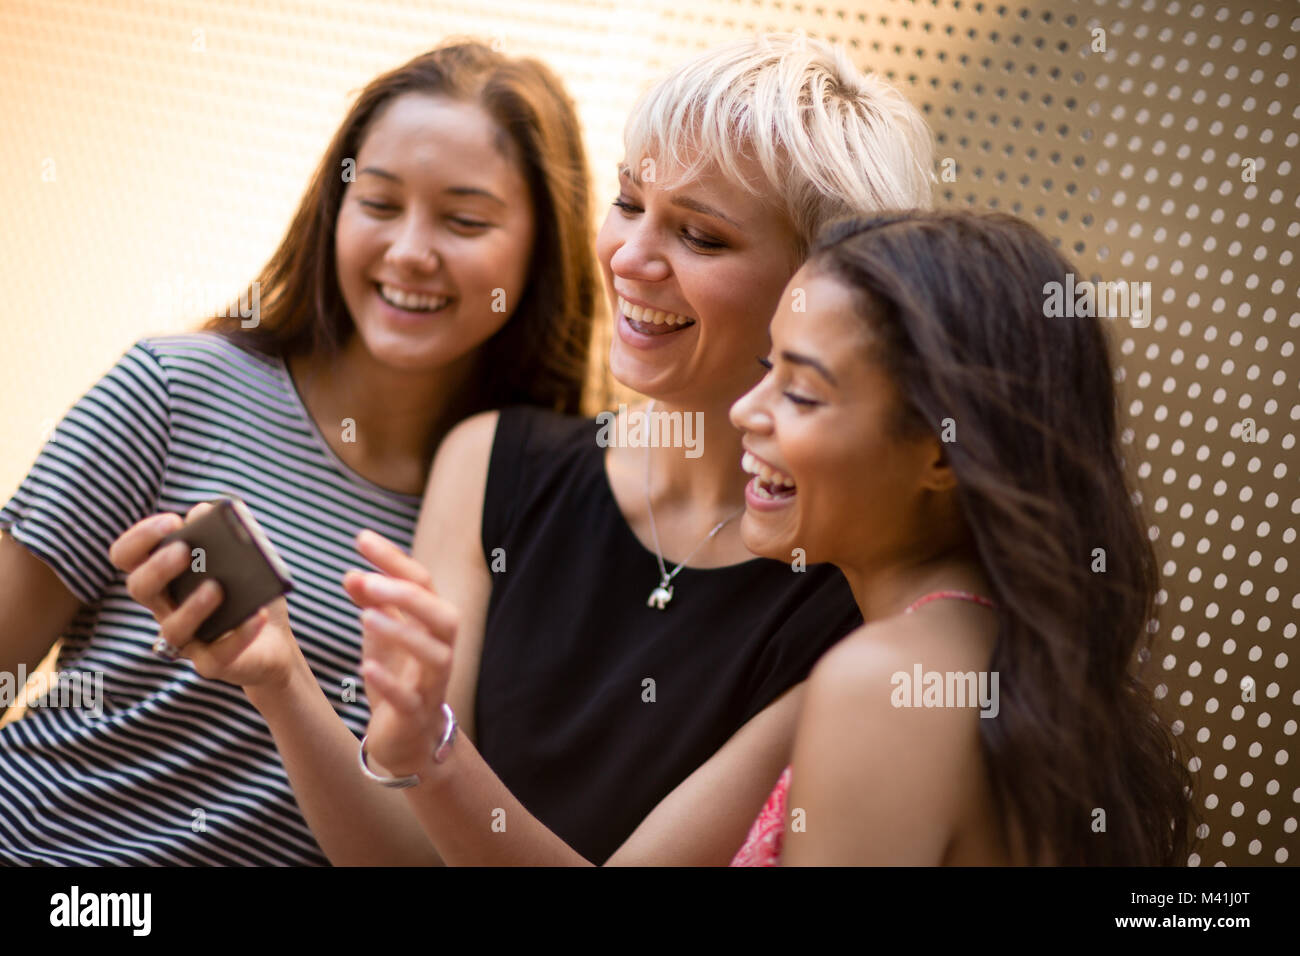 Female friends looking at smartphone Banque D'Images